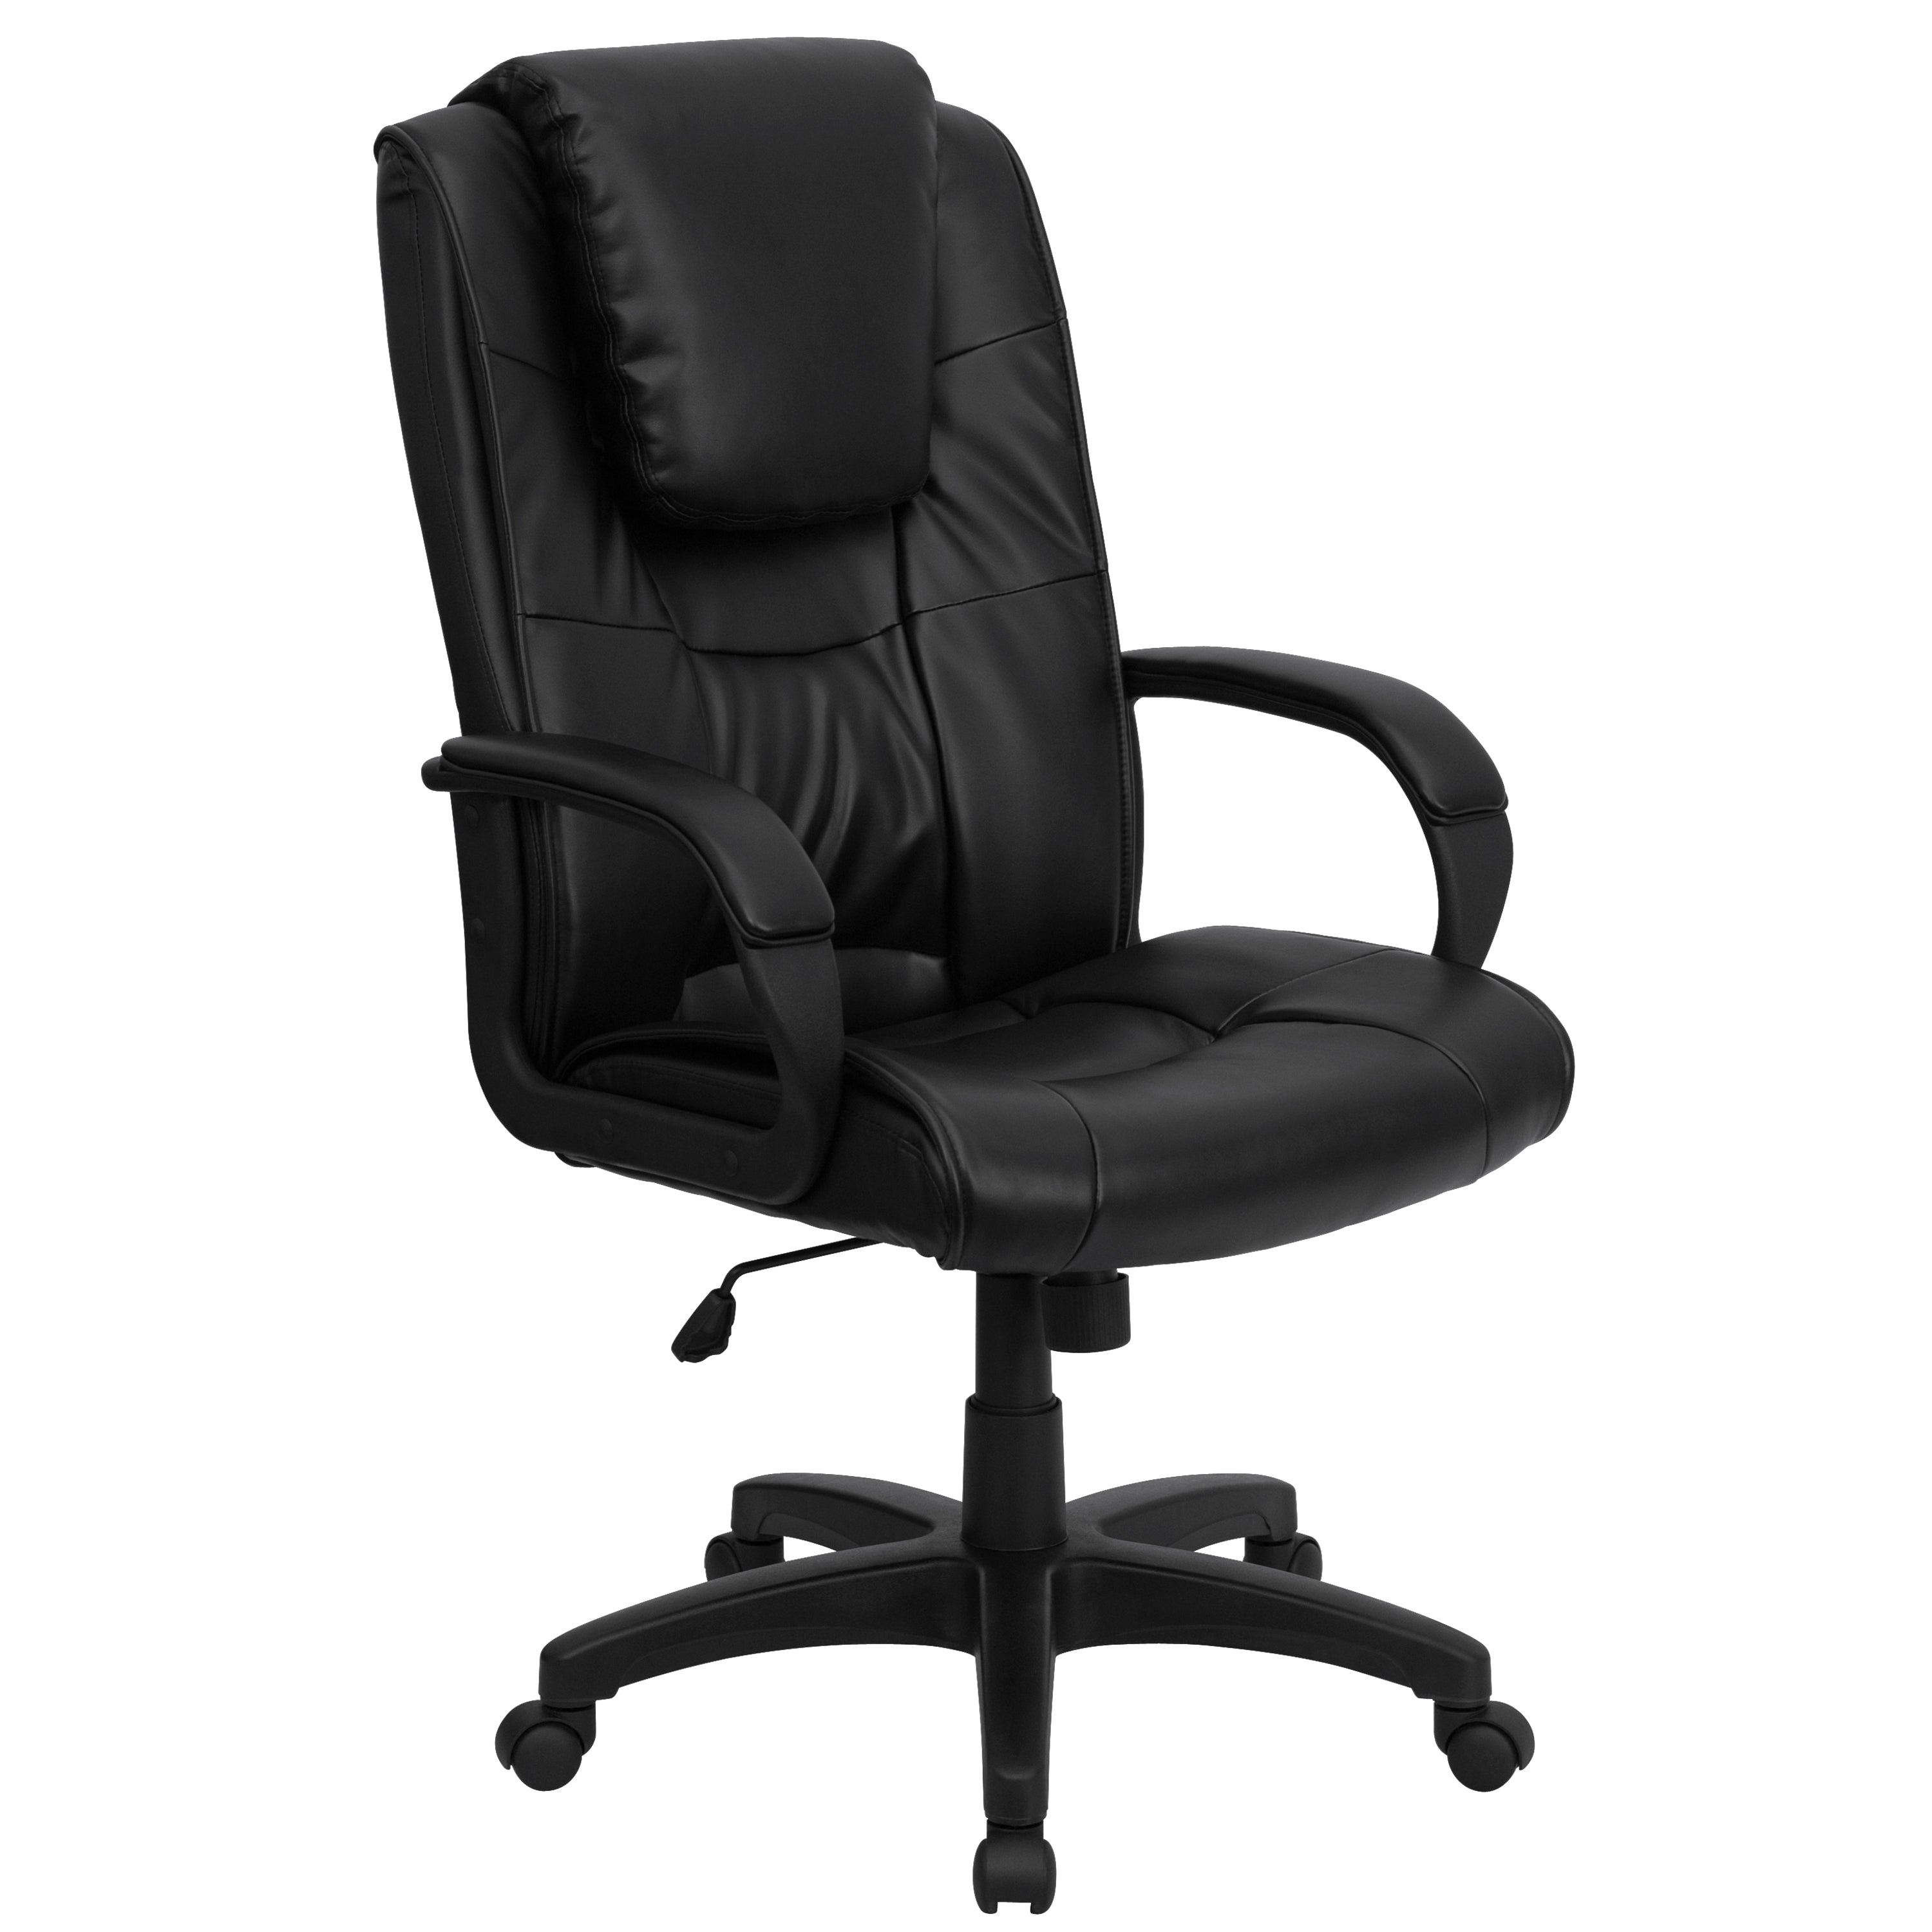 High Back LeatherSoft Executive Swivel Office Chair with Oversized Headrest and Arms-Office Chair-Flash Furniture-Wall2Wall Furnishings